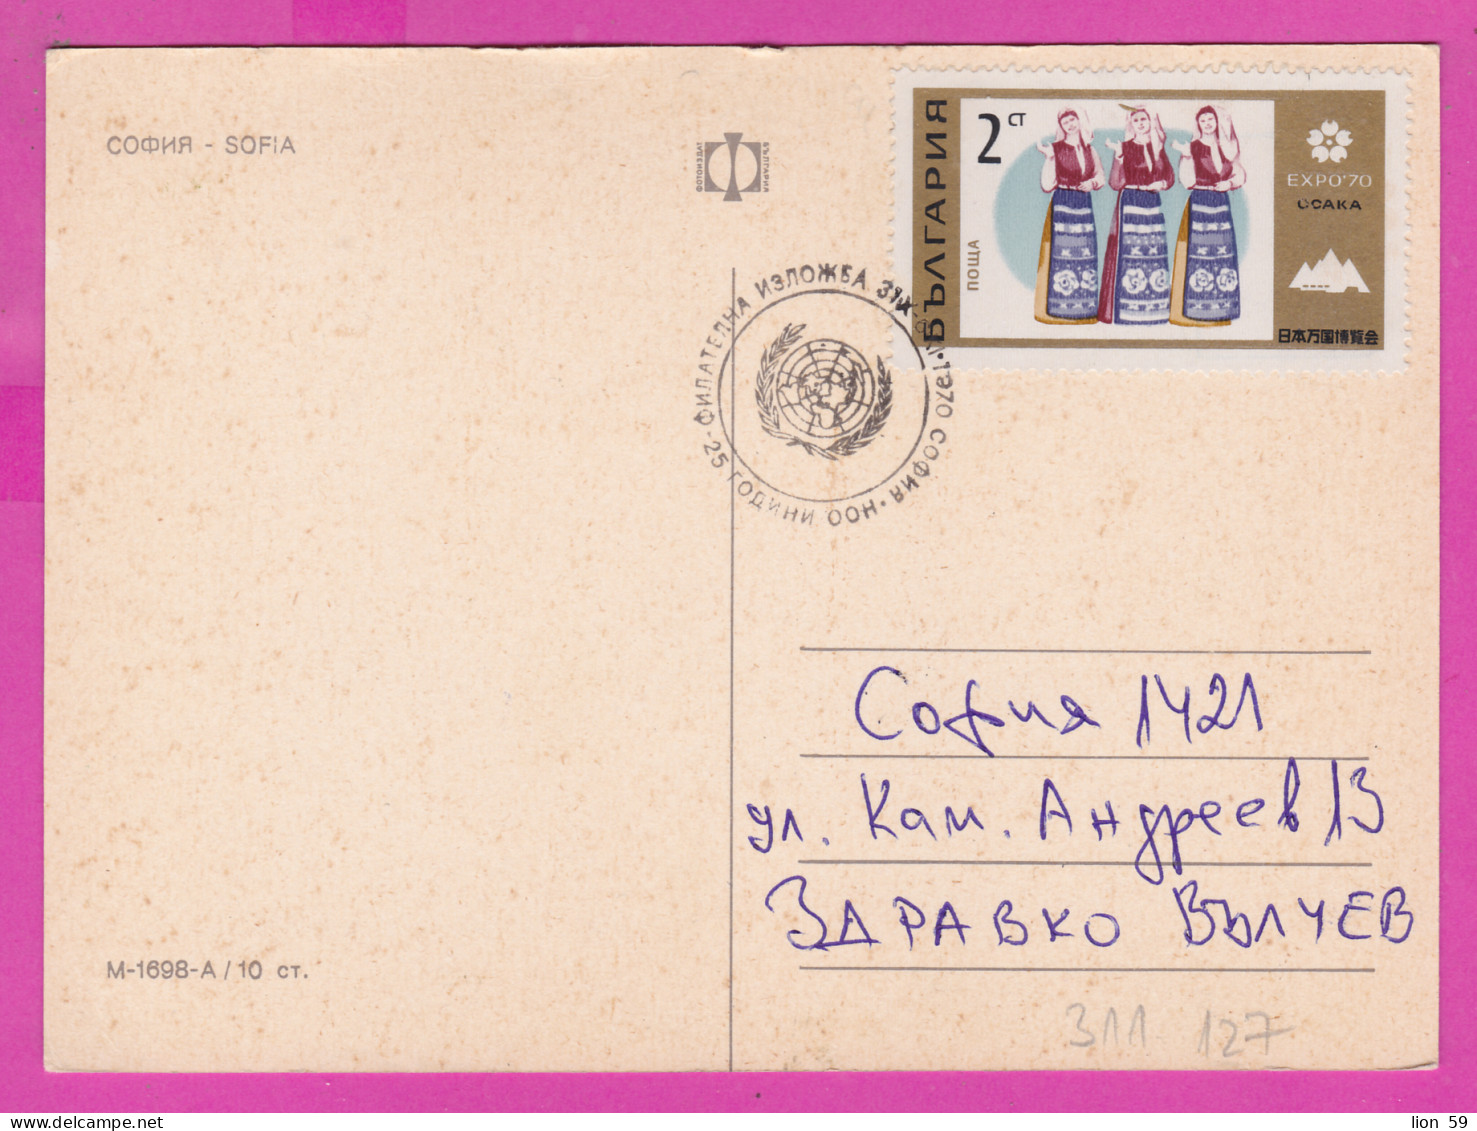 311127 / Bulgaria - Sofia - 8 View Monument  Mausoleum.... PC 1970 Used 25 Year United Nations OON Philatelic Exhibition - Covers & Documents